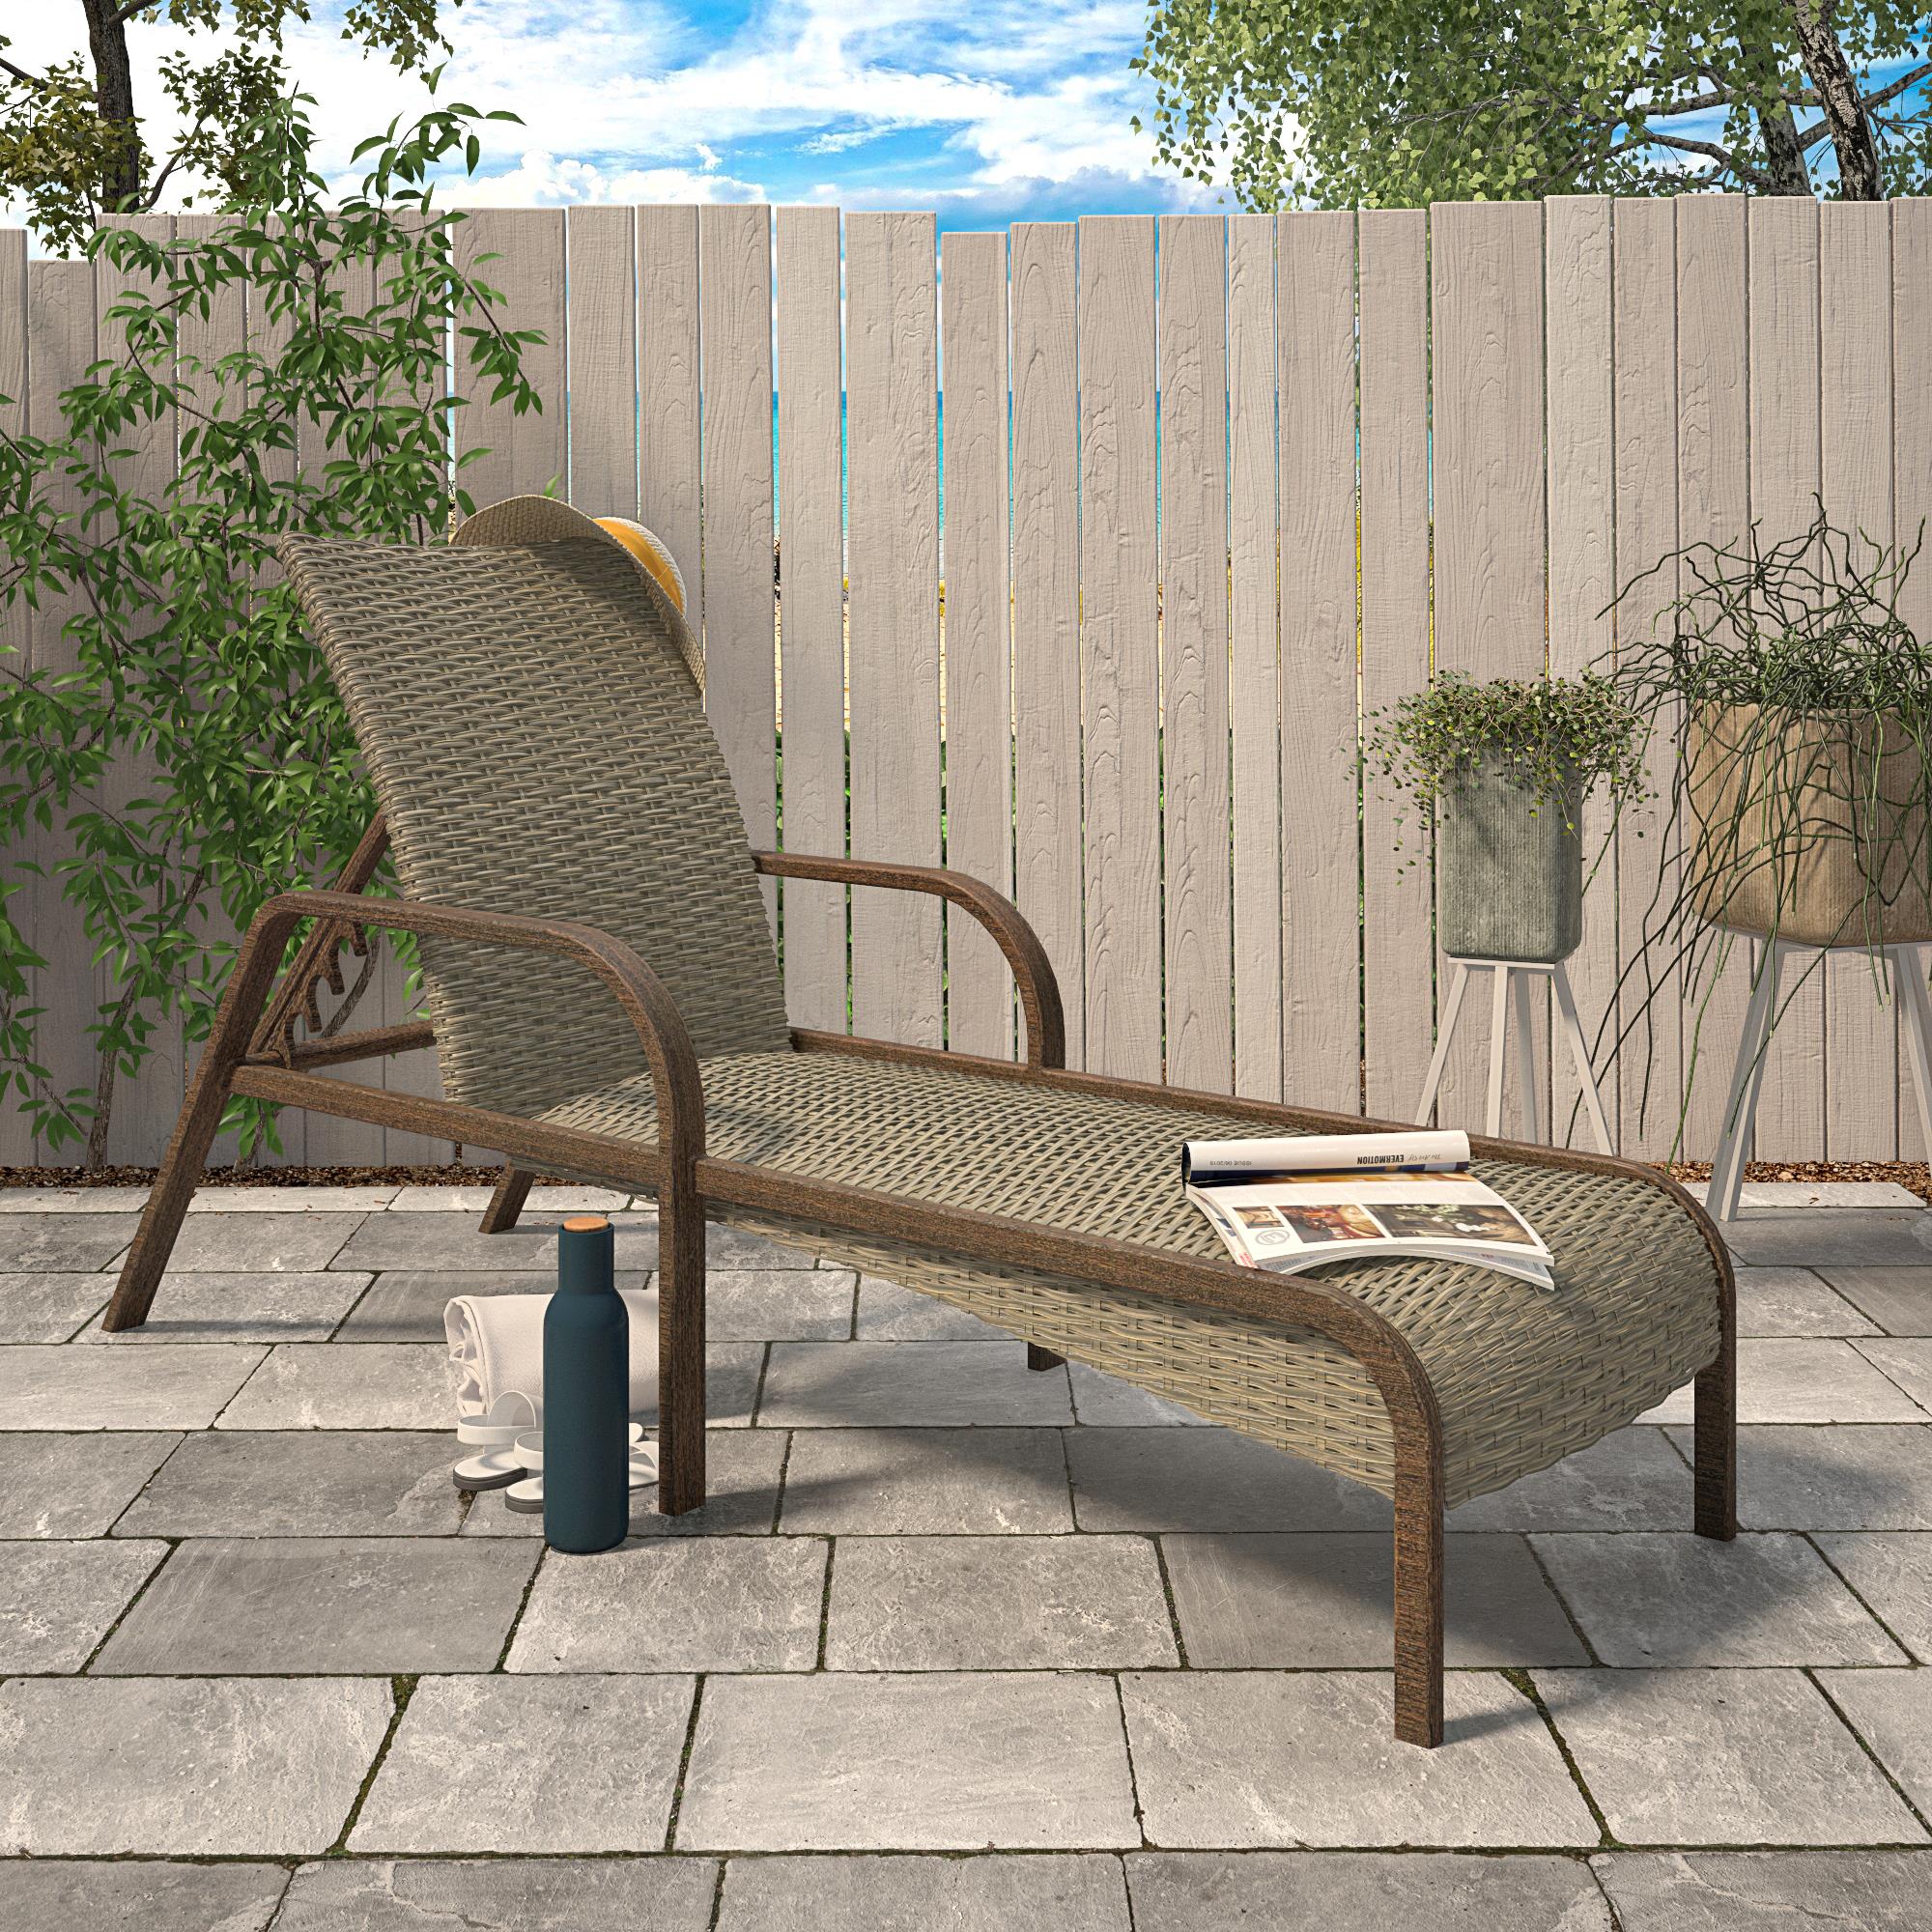 COSCO Outdoor Living, SmartWick, Patio Chaise Lounge, Warm Gray - image 1 of 9